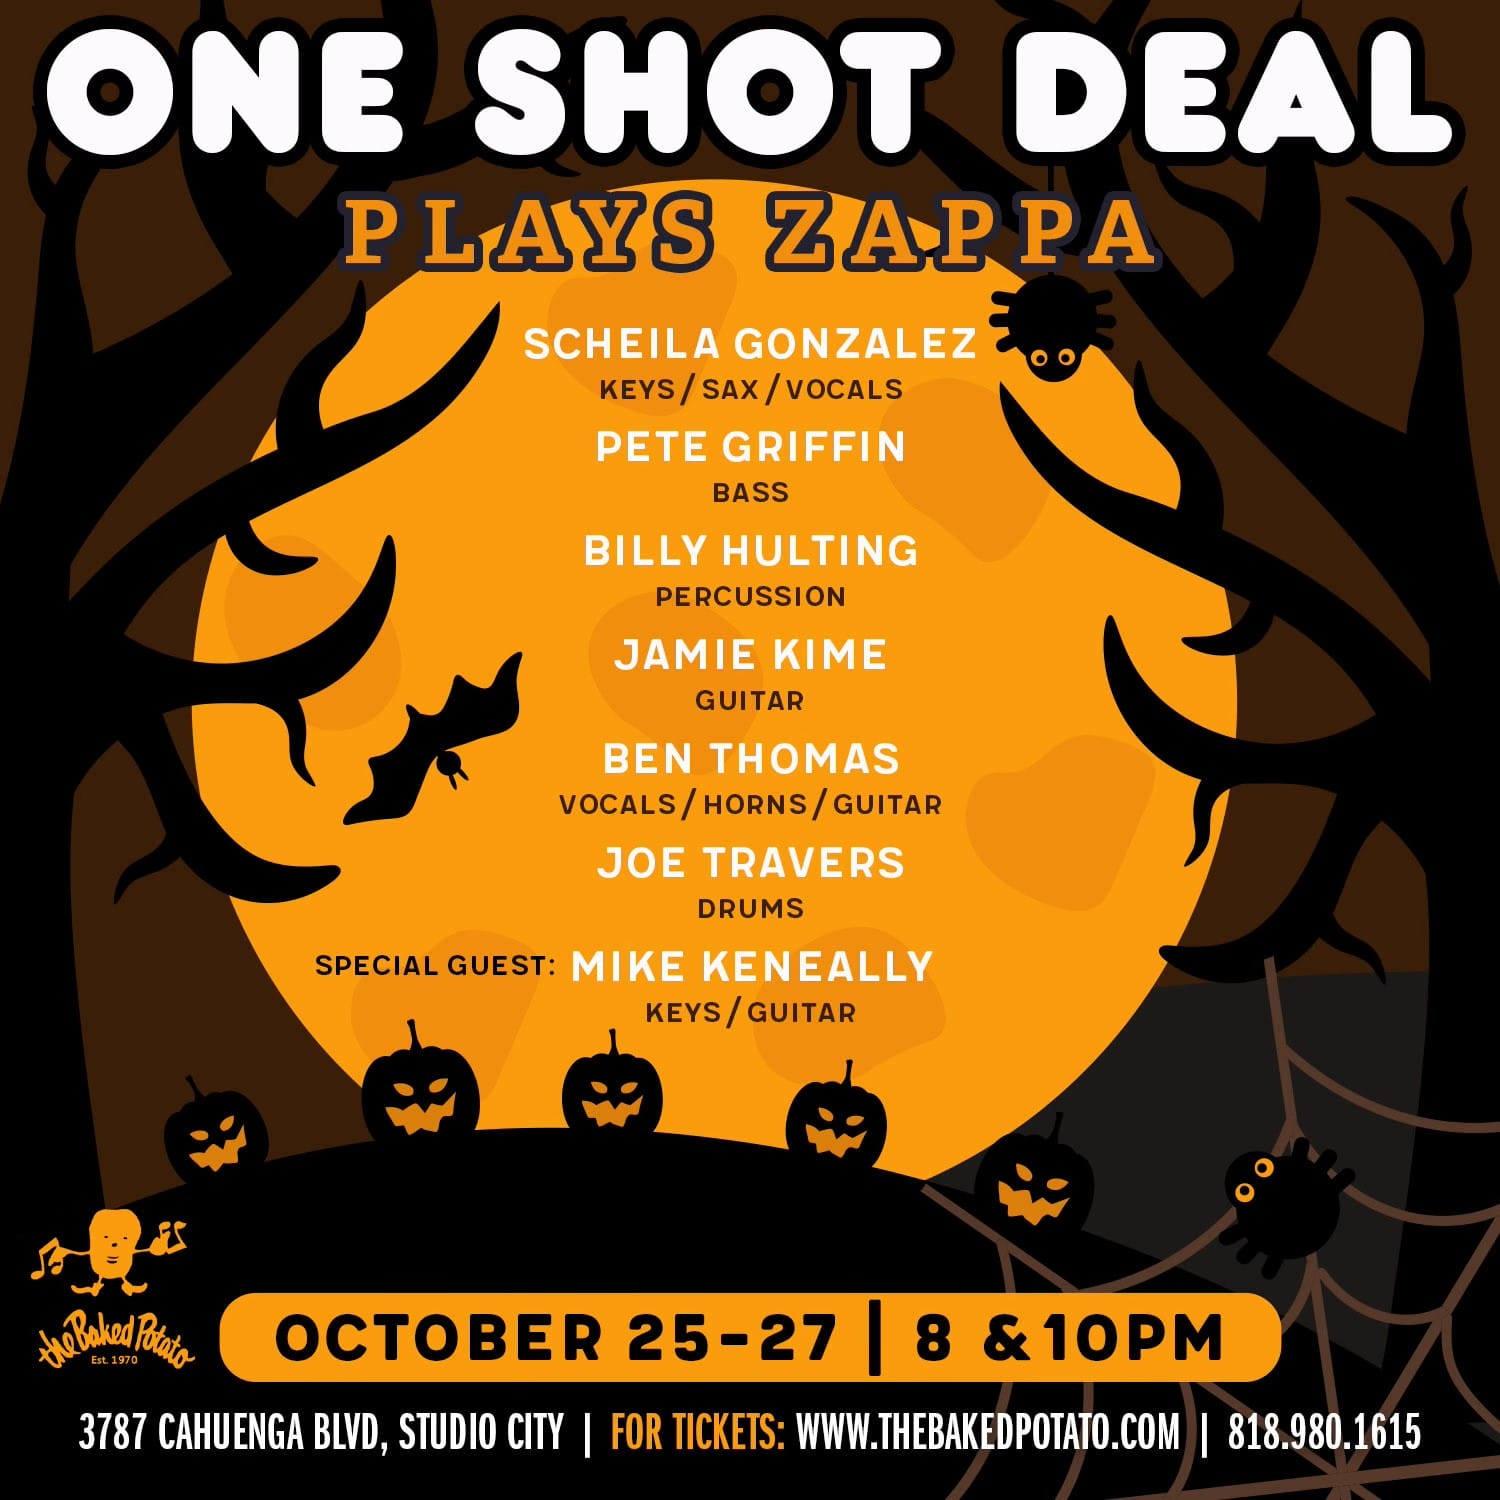 ONE SHOT DEAL Plays ZAPPA - Friday, October 27, 2023